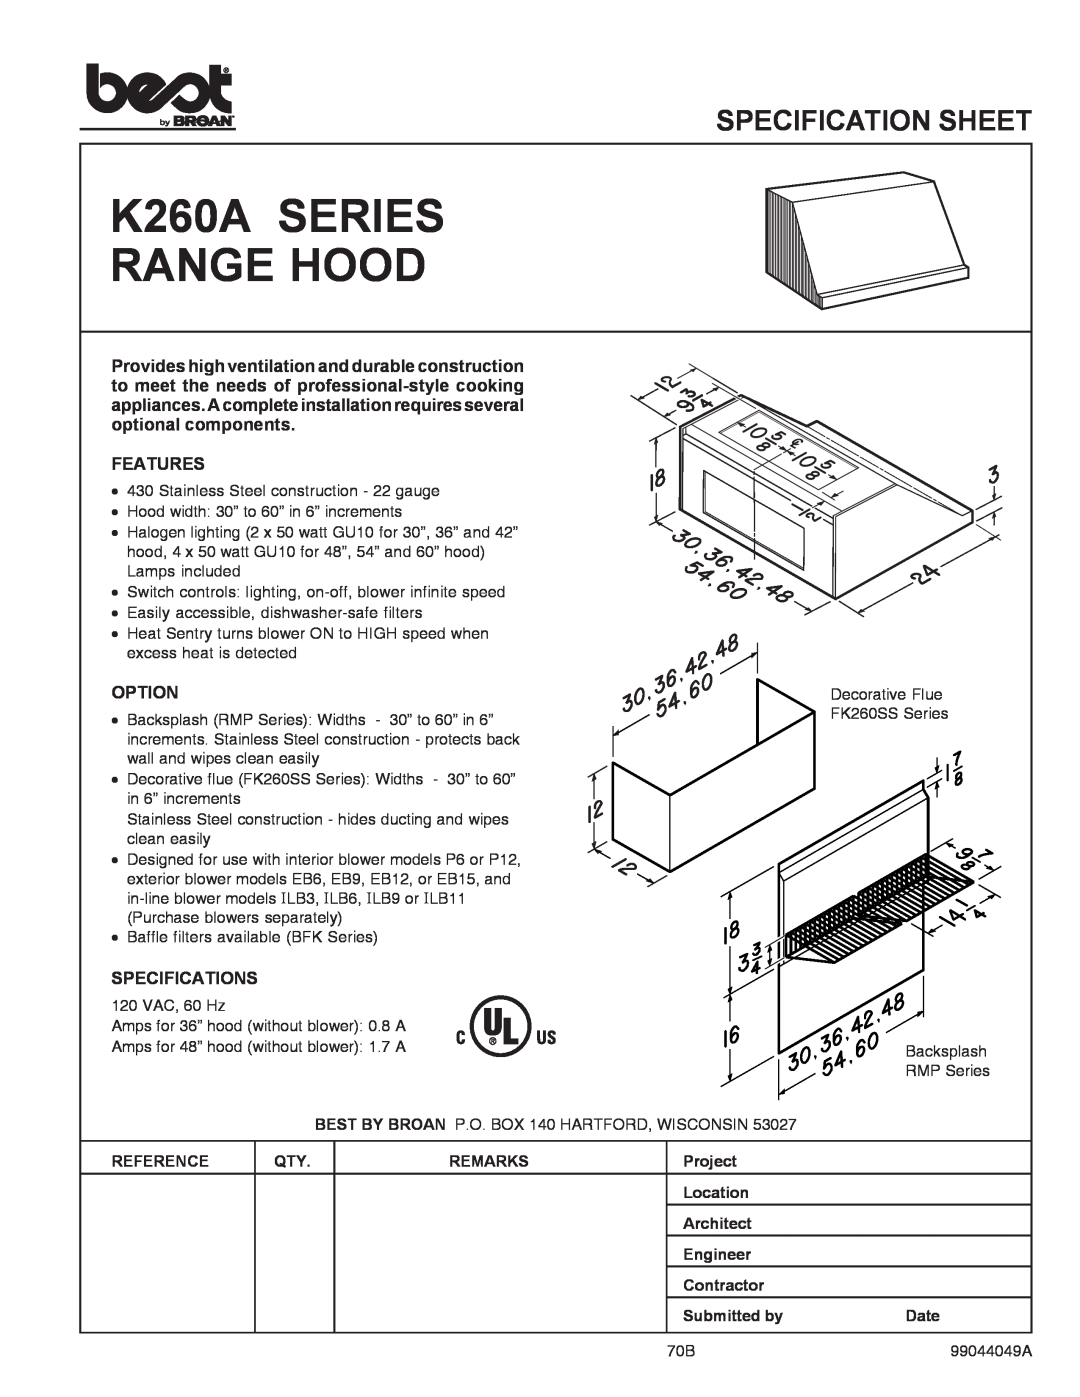 Best K260A series specifications K260A SERIES RANGE HOOD, Specification Sheet, Features, Option, Specifications, Reference 